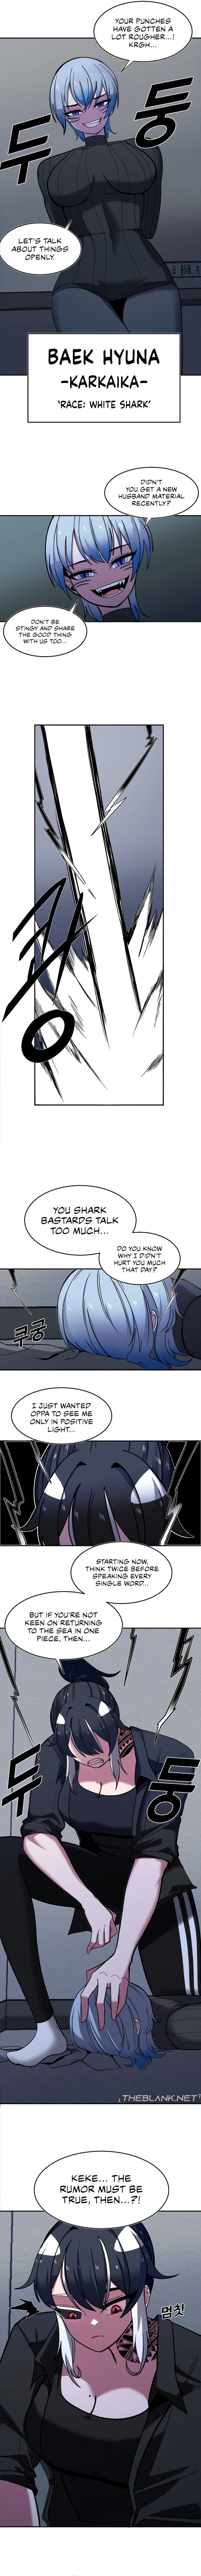 Double Life of Gukbap - Chapter 9 Page 4